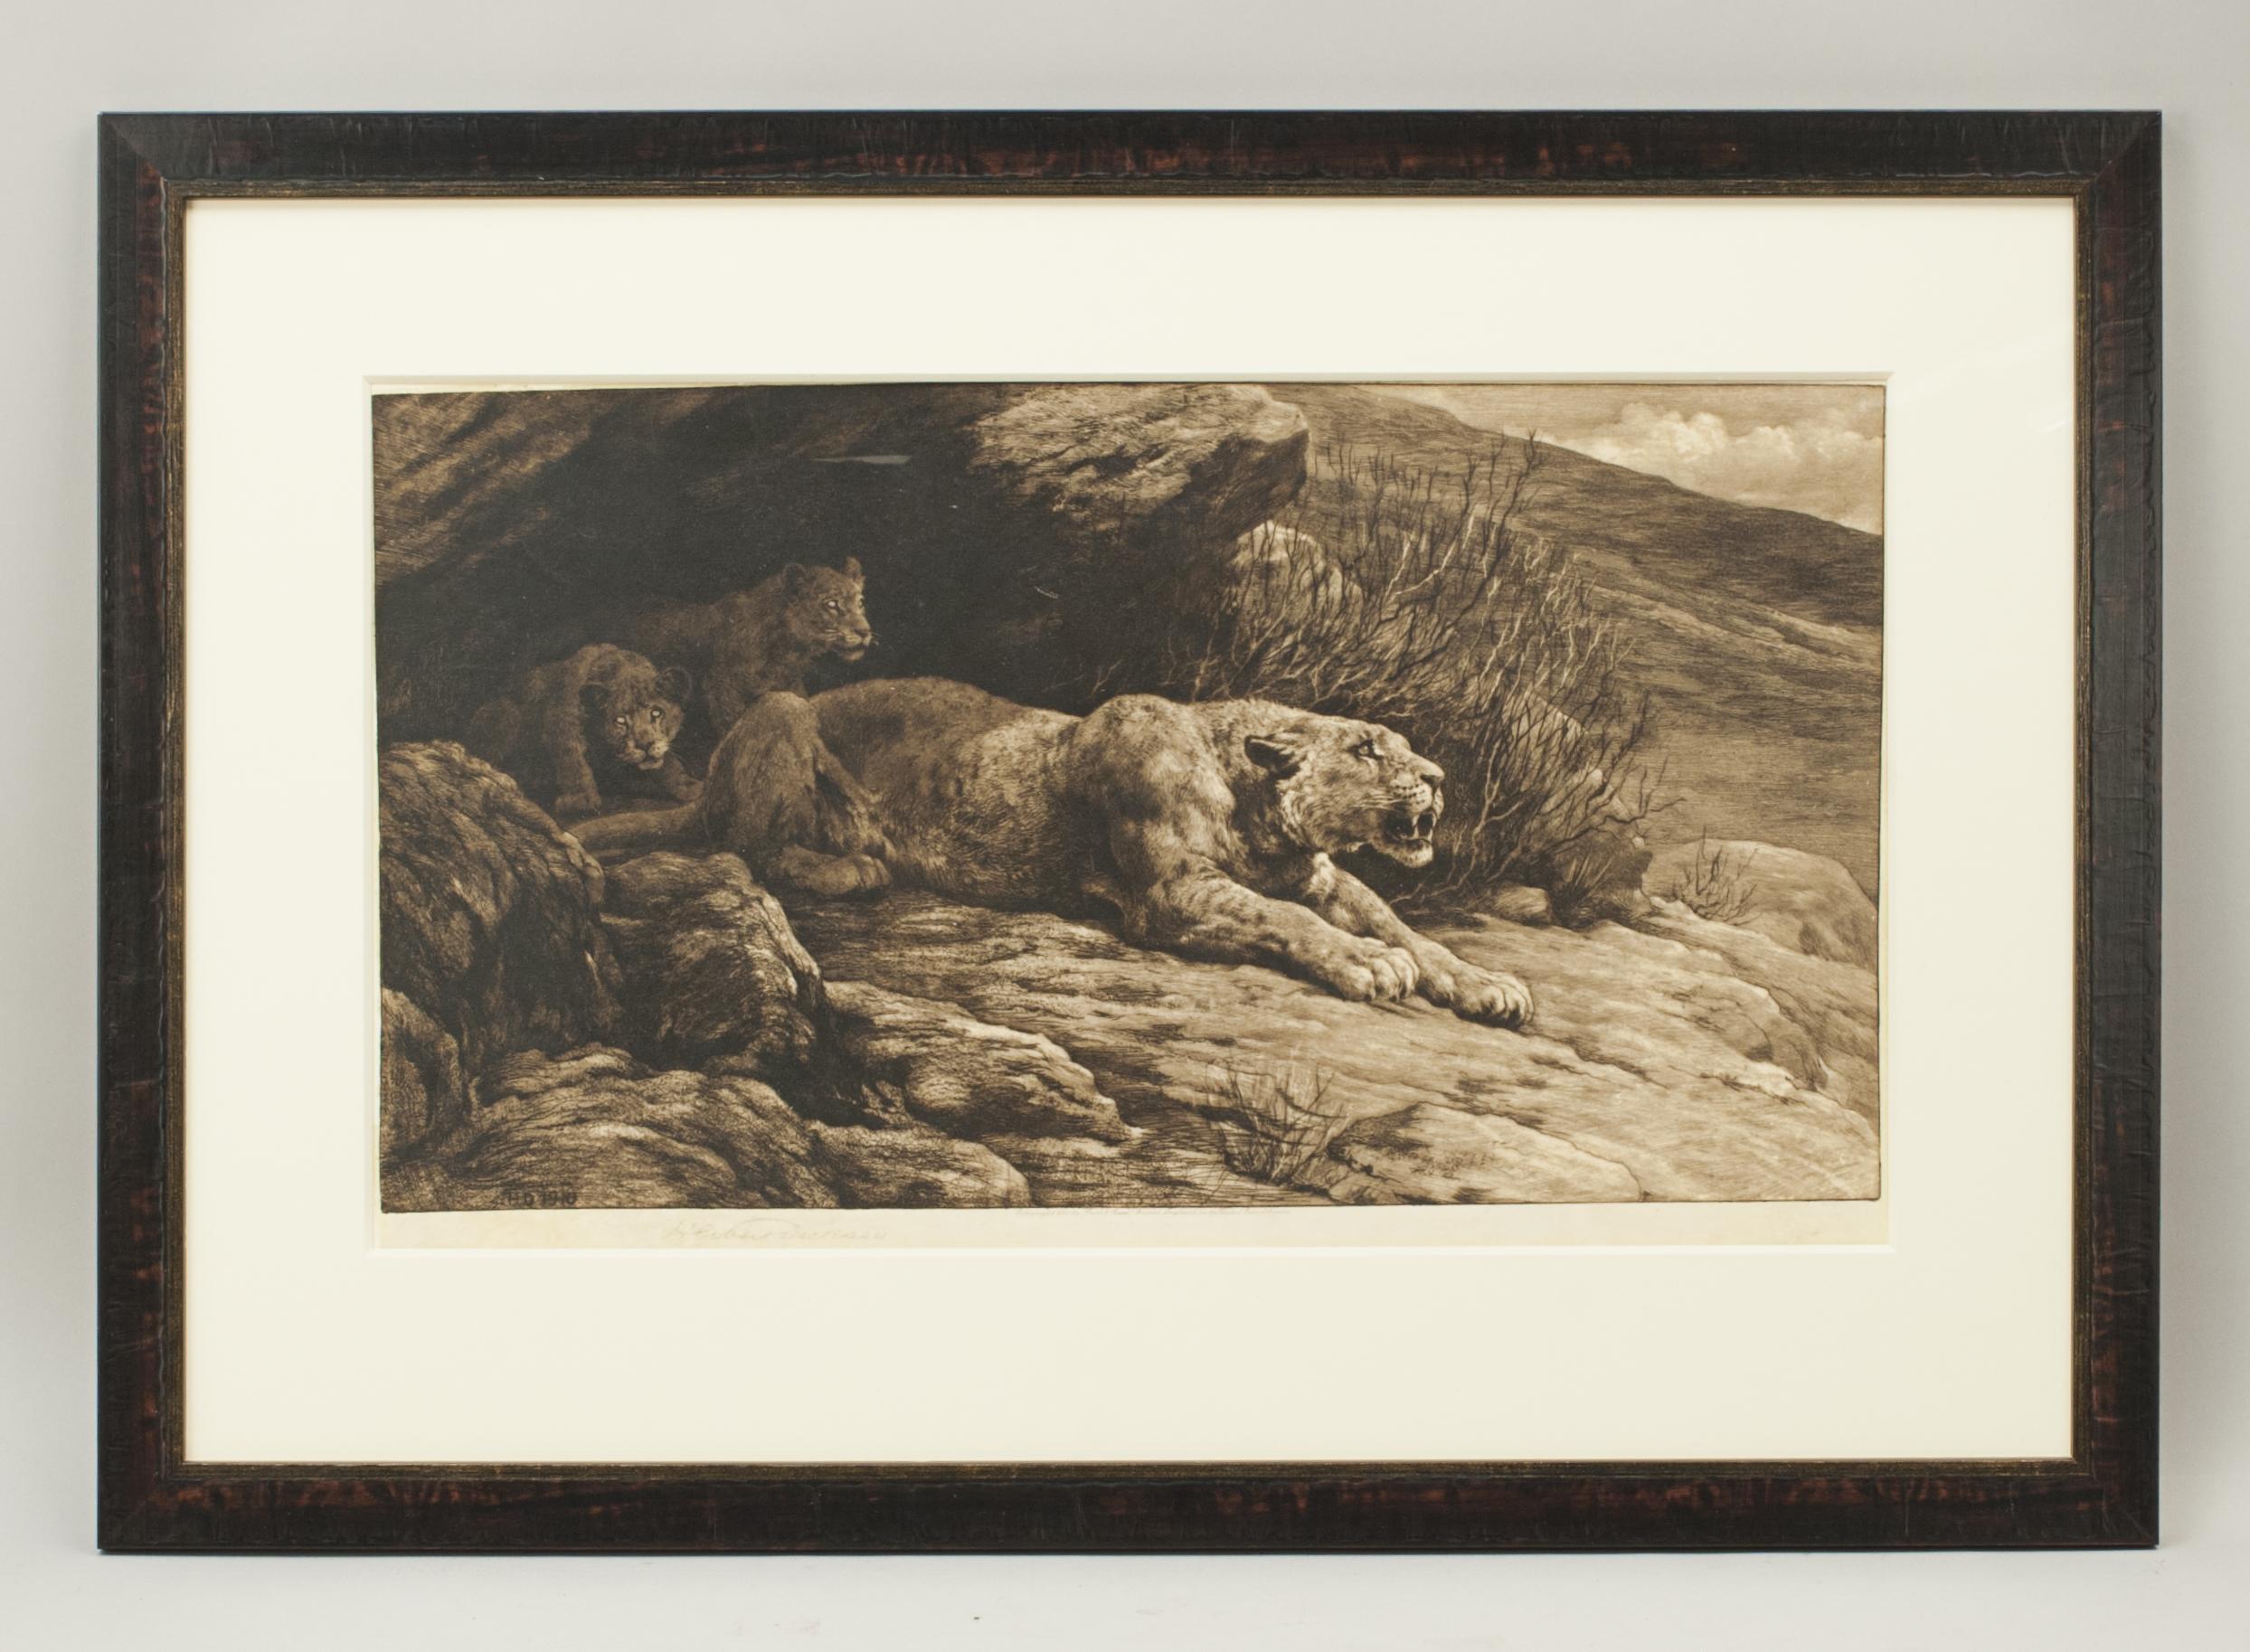 Herbert Dicksee's mountain lion with cubs.
A striking image of a mother mounting lion protecting her two cubs. The etching is signed in pencil by the artist, Herbert Dicksee. The extra information printed around the image states 'Published at 8